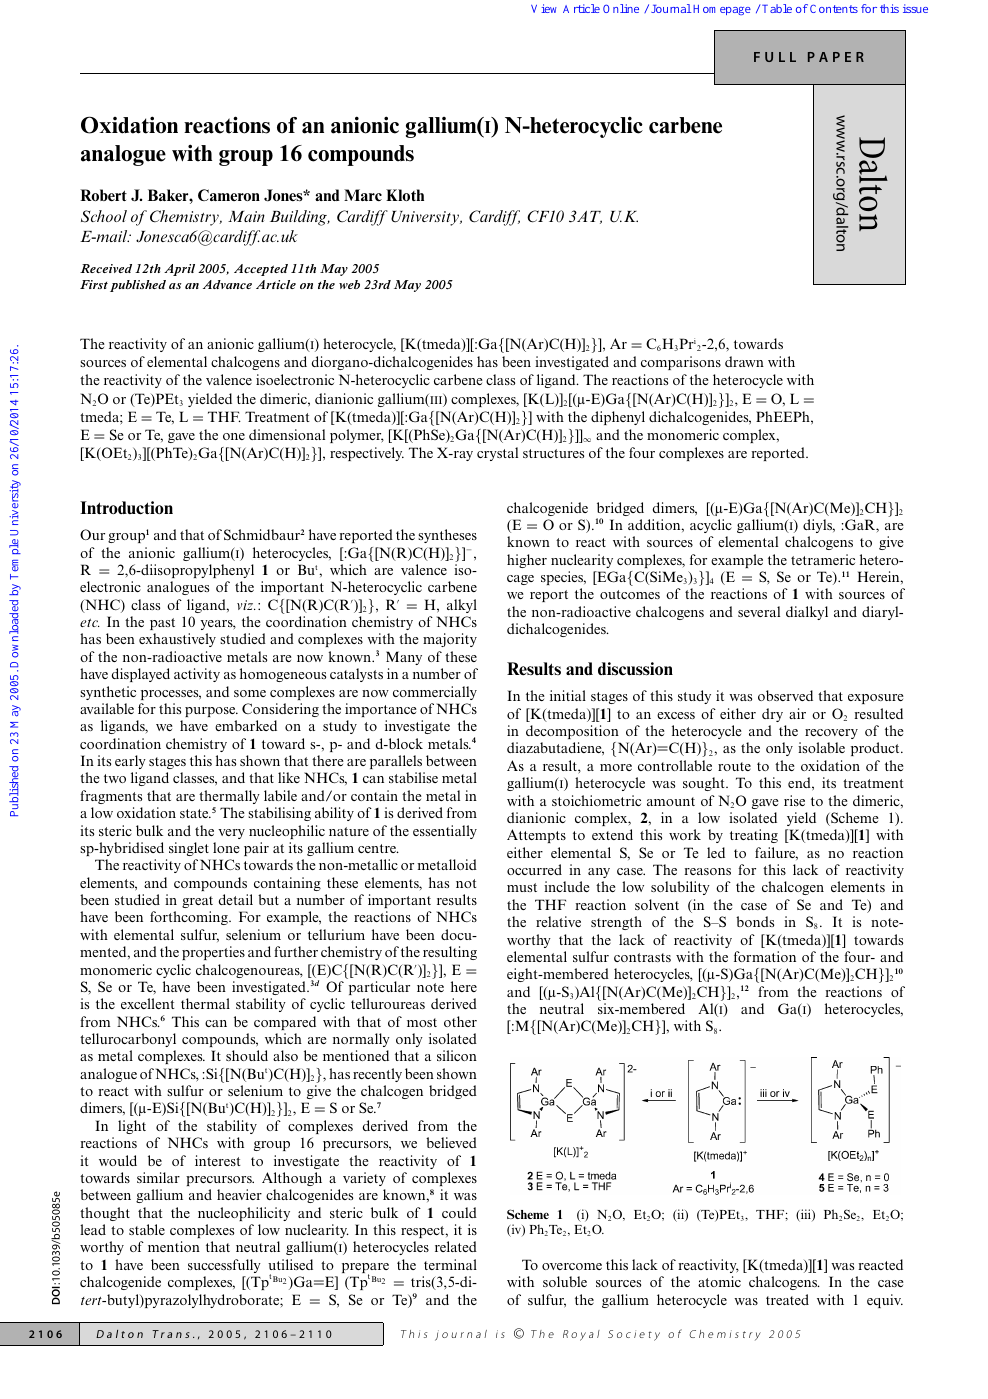 Oxidation Reactions Of An Anionic Gallium I N Heterocyclic Carbene Analogue With Group 16 Compounds Topic Of Research Paper In Chemical Sciences Download Scholarly Article Pdf And Read For Free On Cyberleninka Open